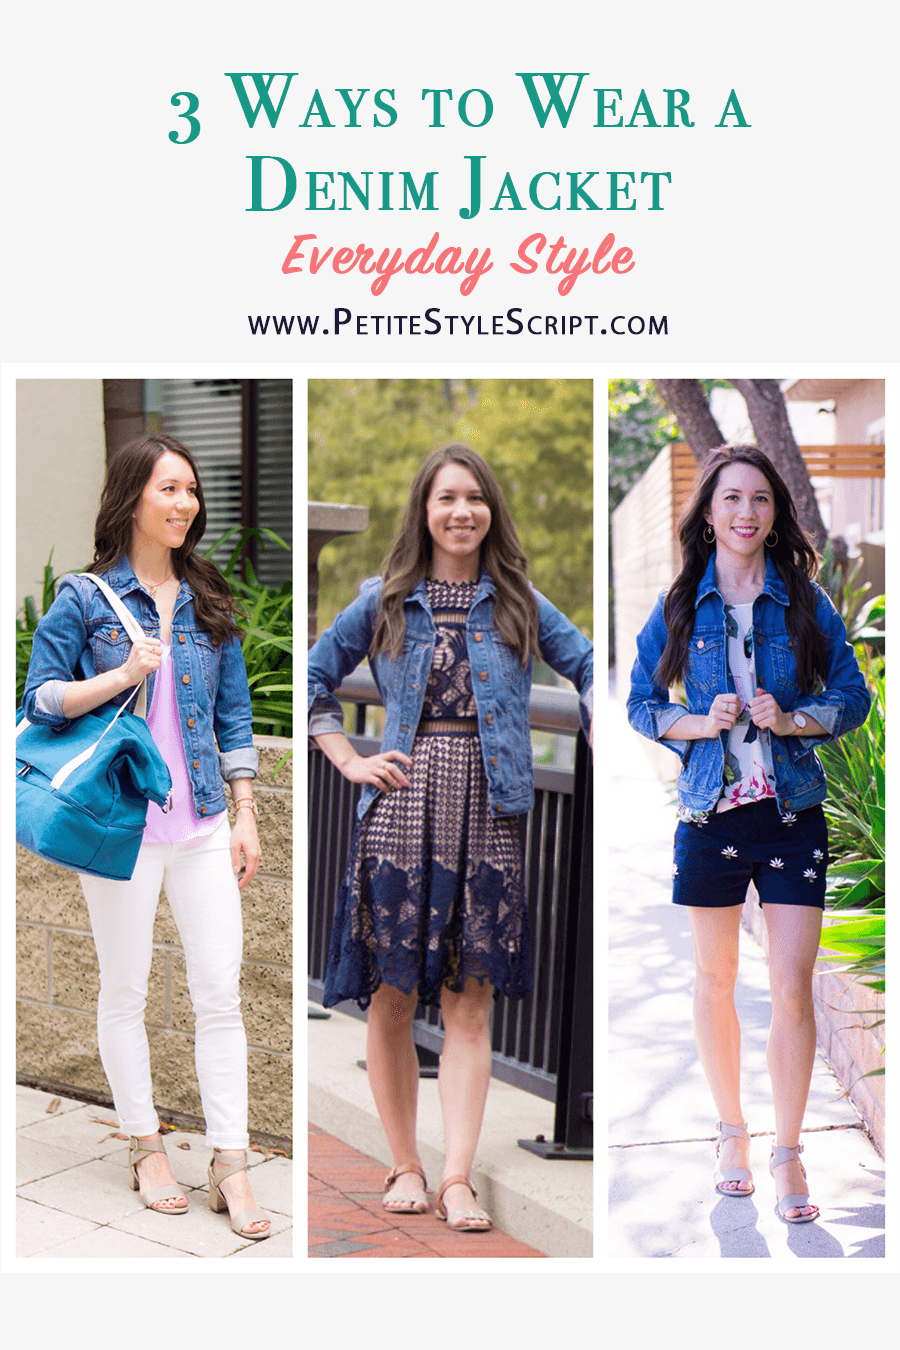 Three ways to wear a denim jacket from J. Crew or J. Crew Factory stores in petite-friendly sizing. Petite Fashion and Style Blog with Aqua lace dress, Shorts or Paige white denim and M. Gemi Attorno Scandals, Lo & Sons Catalina Bag